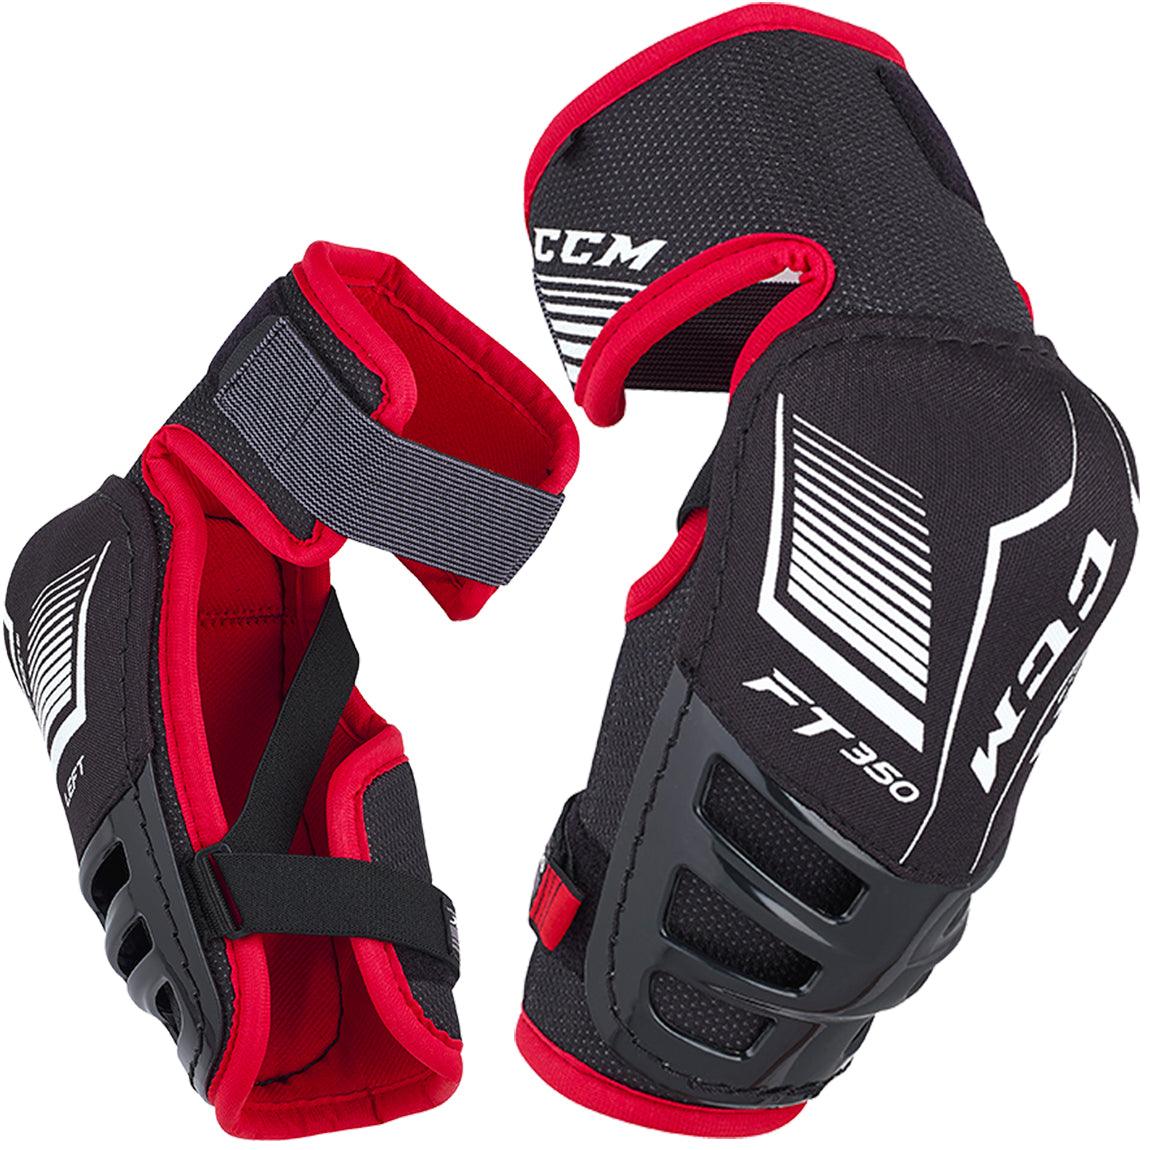 JetSpeed FT350 Elbow Pads - Junior - Sports Excellence